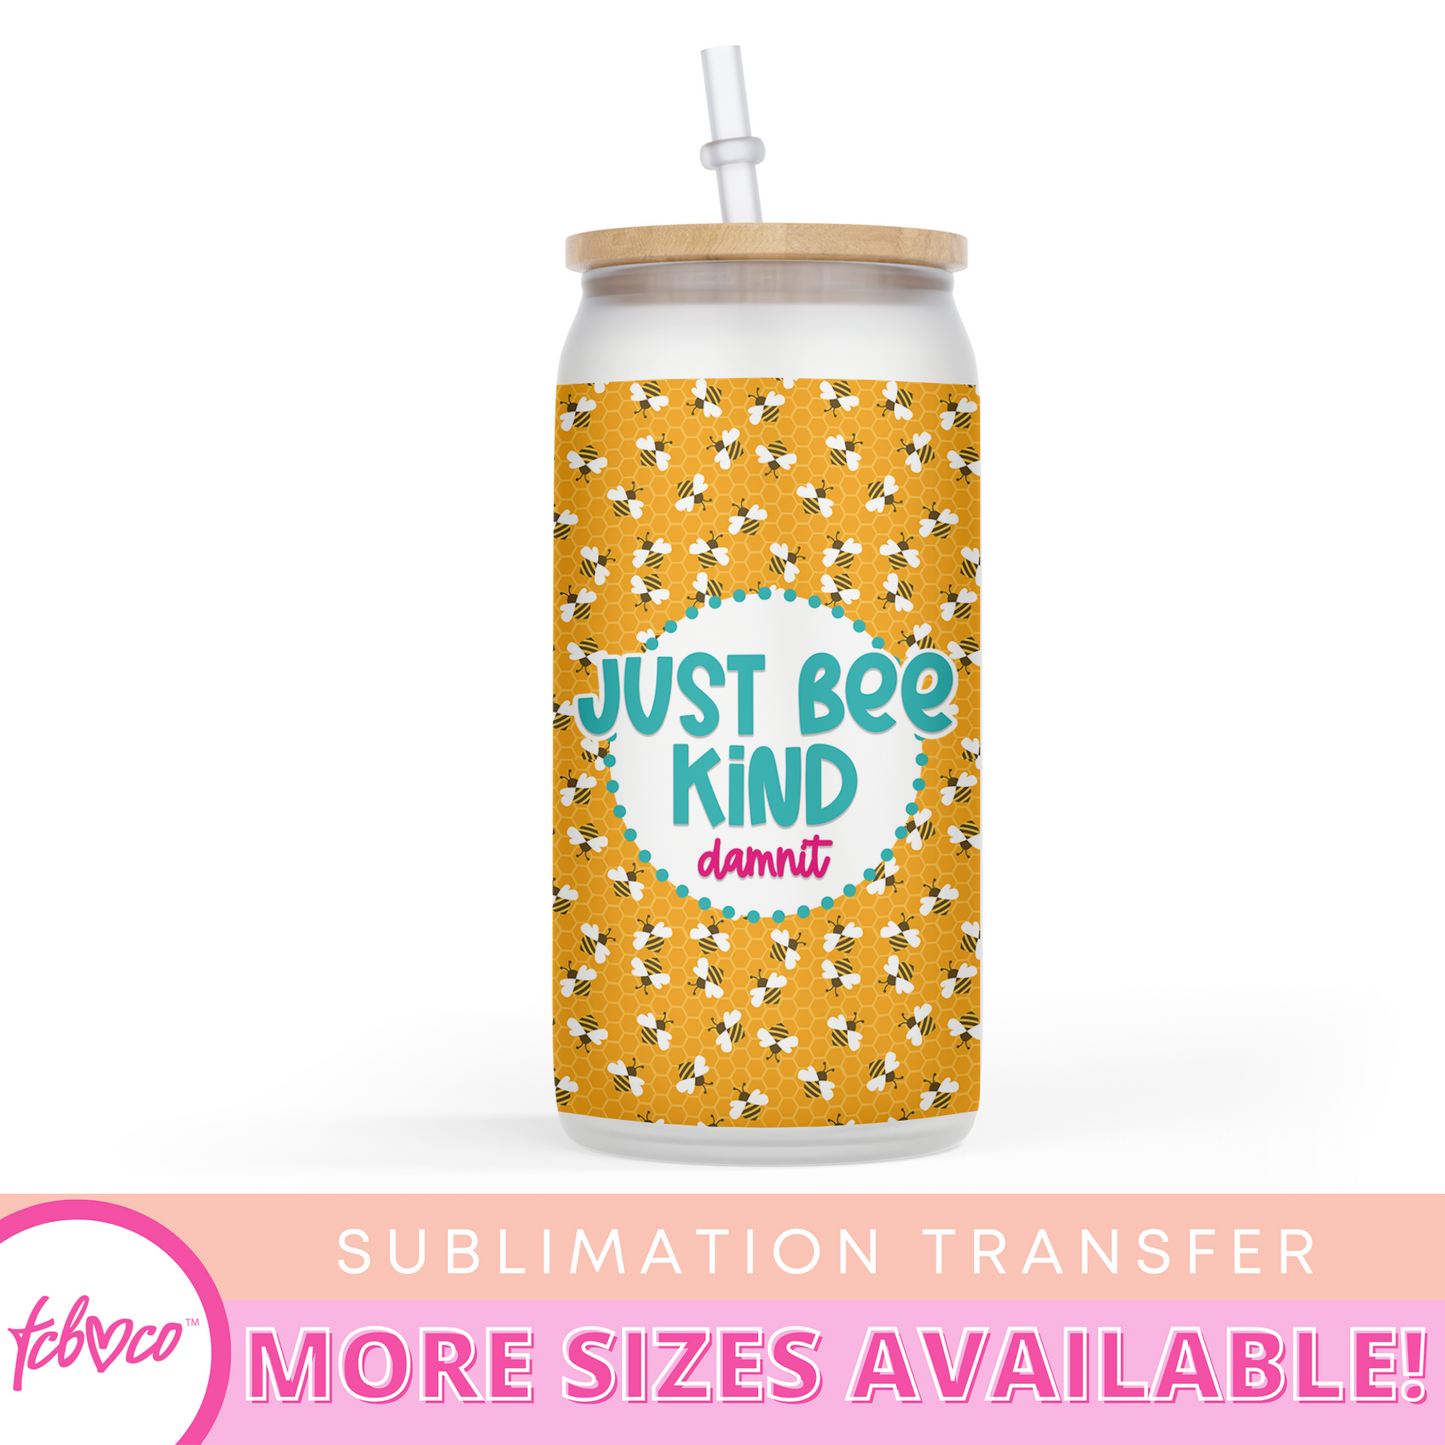 Just Bee Kind Damnit Coaster Sublimation Transfer